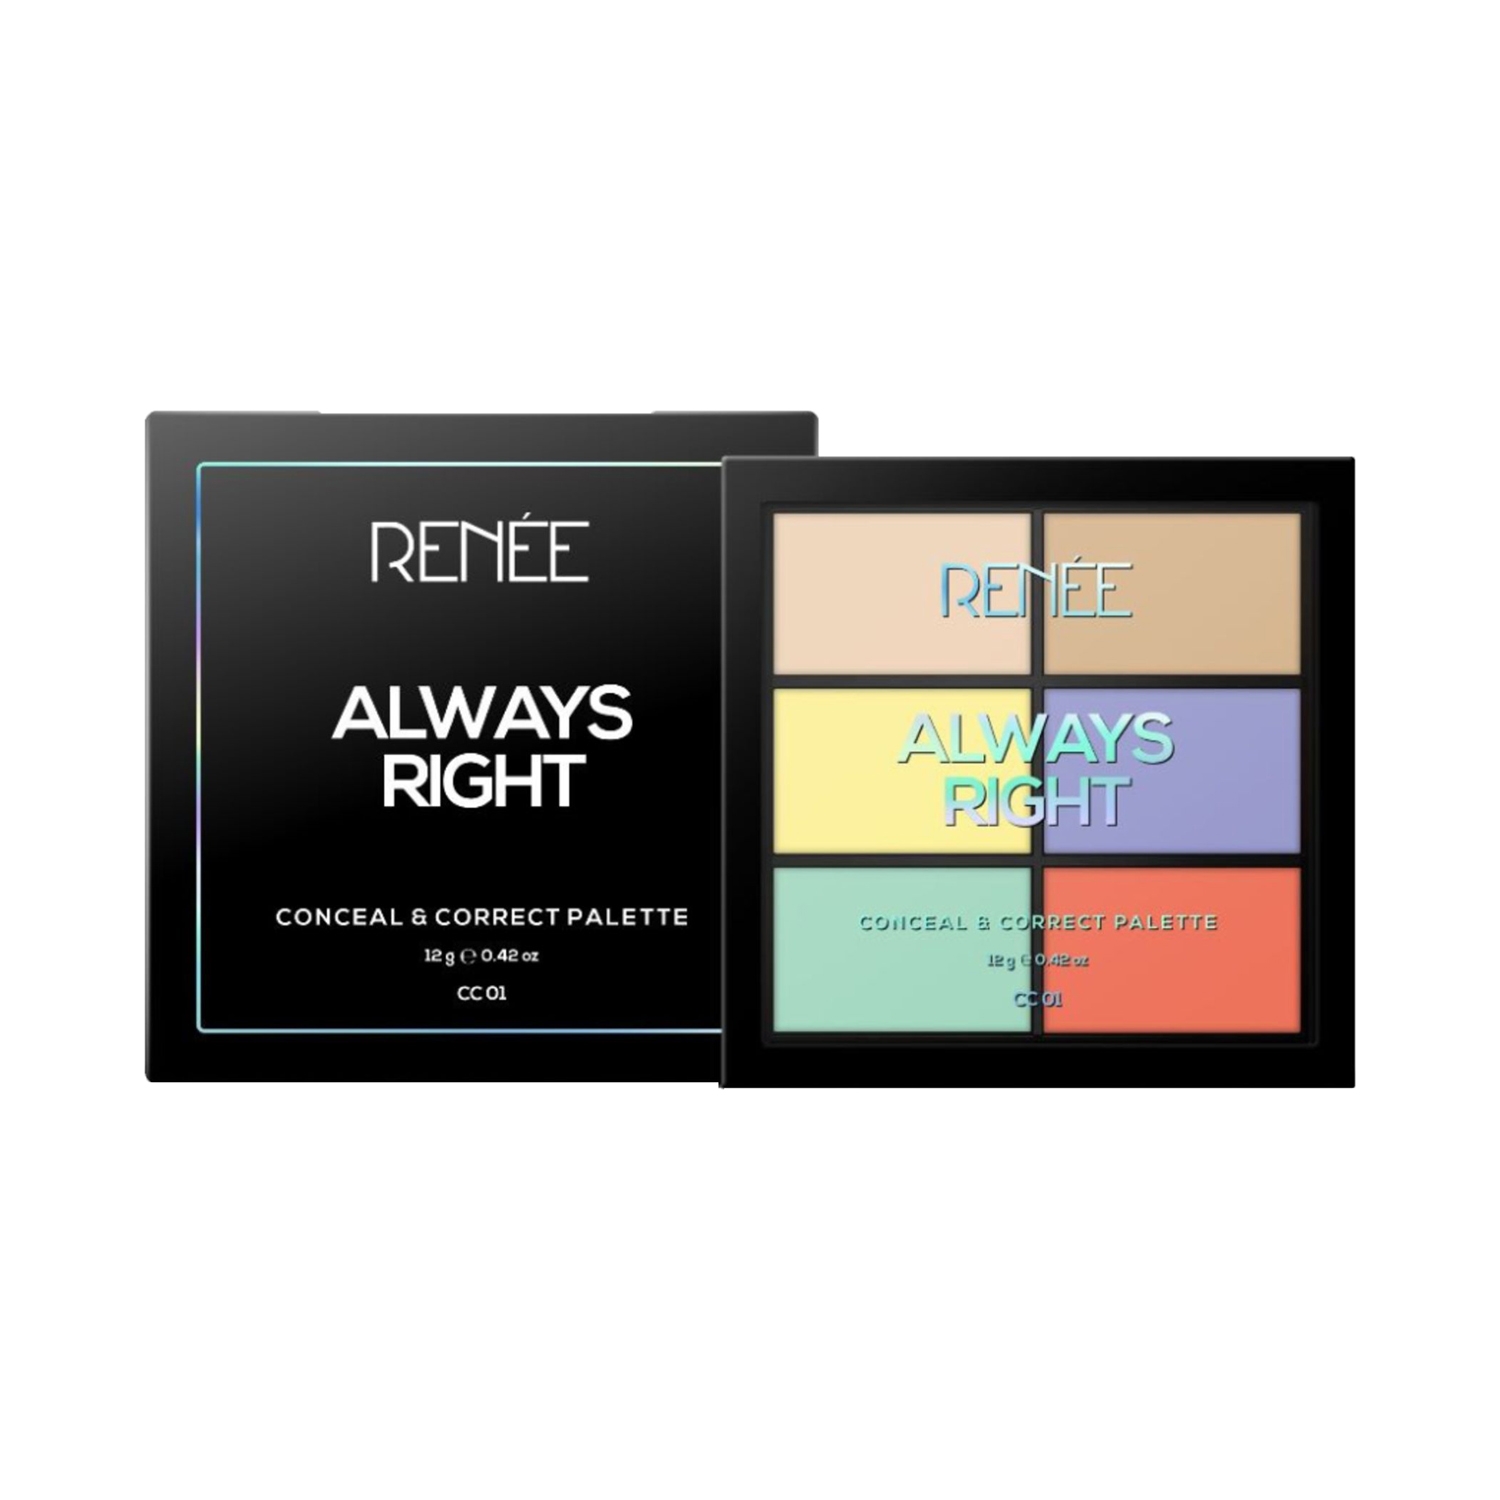 RENEE Always Right Conceal & Correct Palette - CC01 (12g)